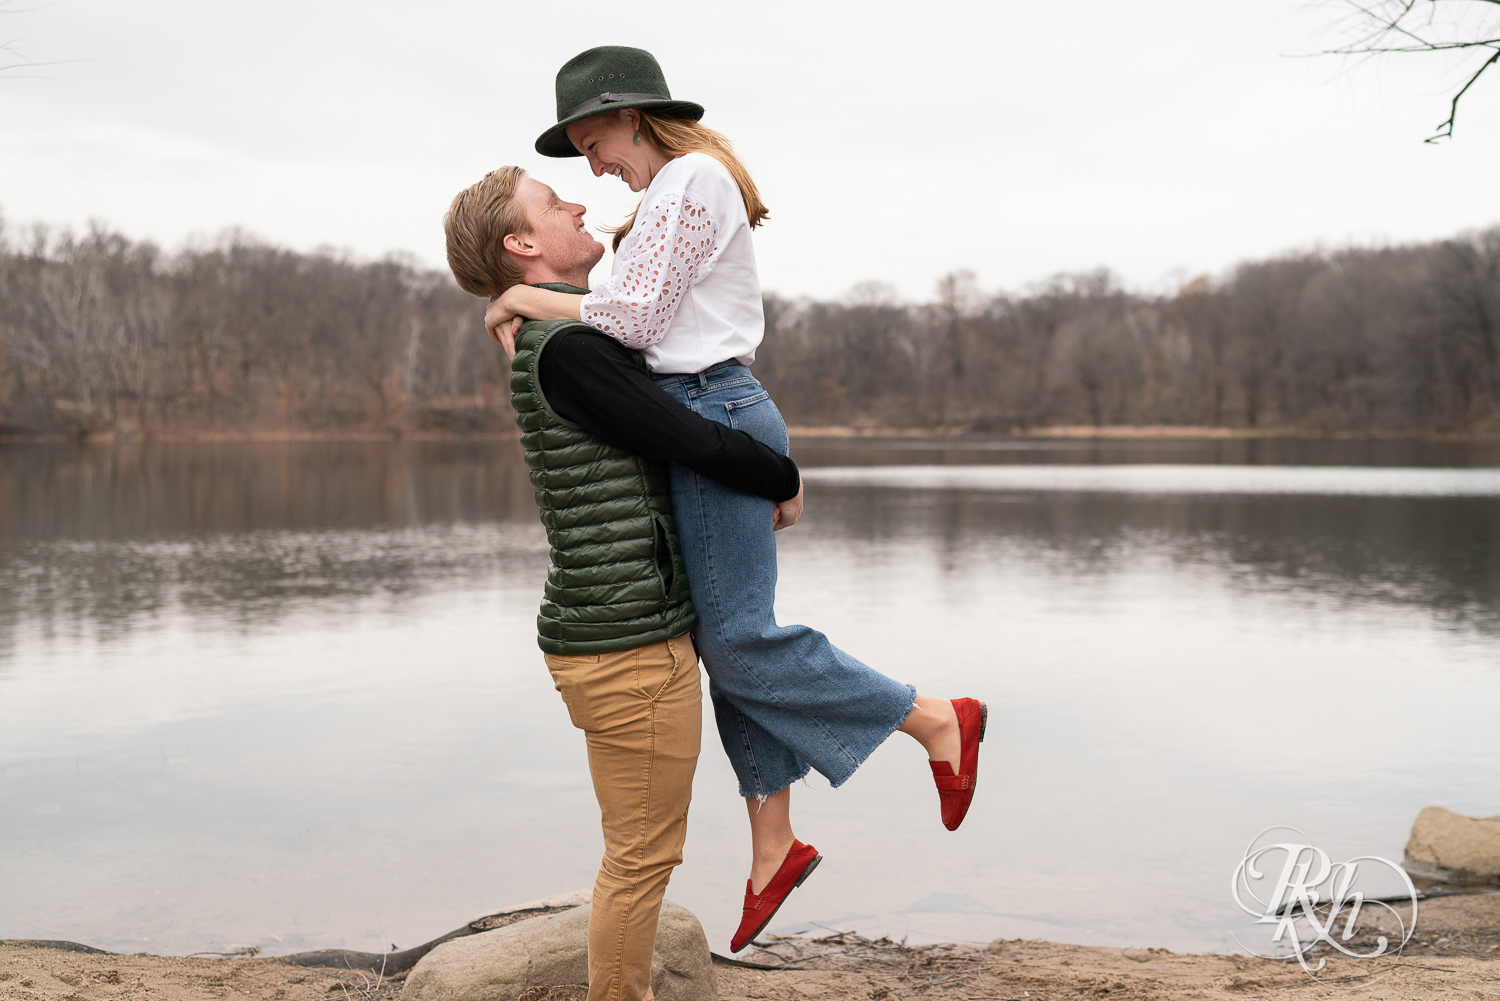 Man lifts woman dressed in jeans and a green hat in front of the lake in Eagan, Minnesota.